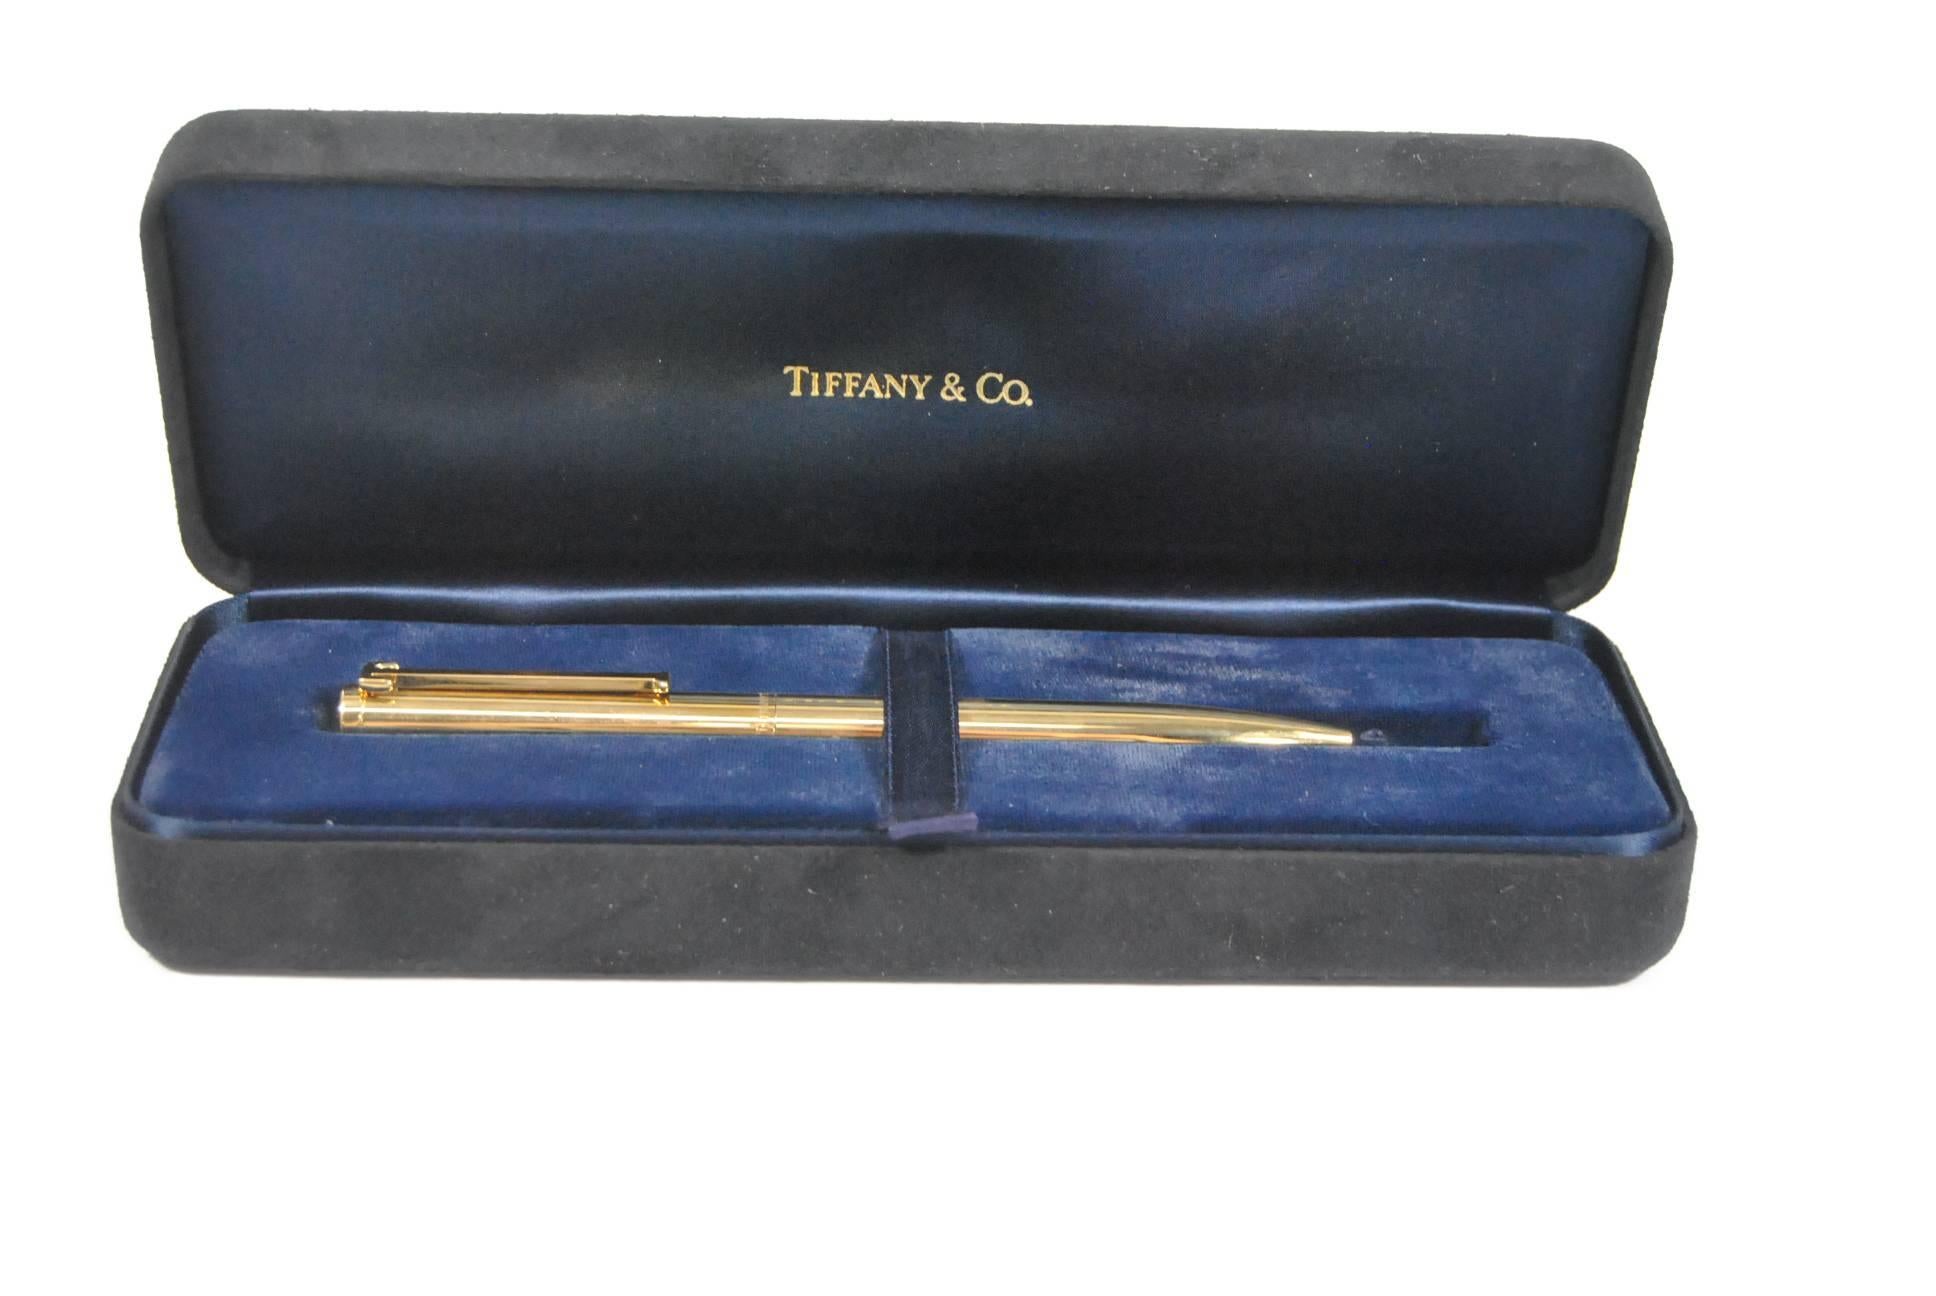 A beautiful 18-karat yellow gold ballpoint pin with "T" on the clip by Tiffany & Co. Pen is in original box. Weight is 39.7 grams and pen is 5 1/2" long. This would make a great gift for that very special someone.